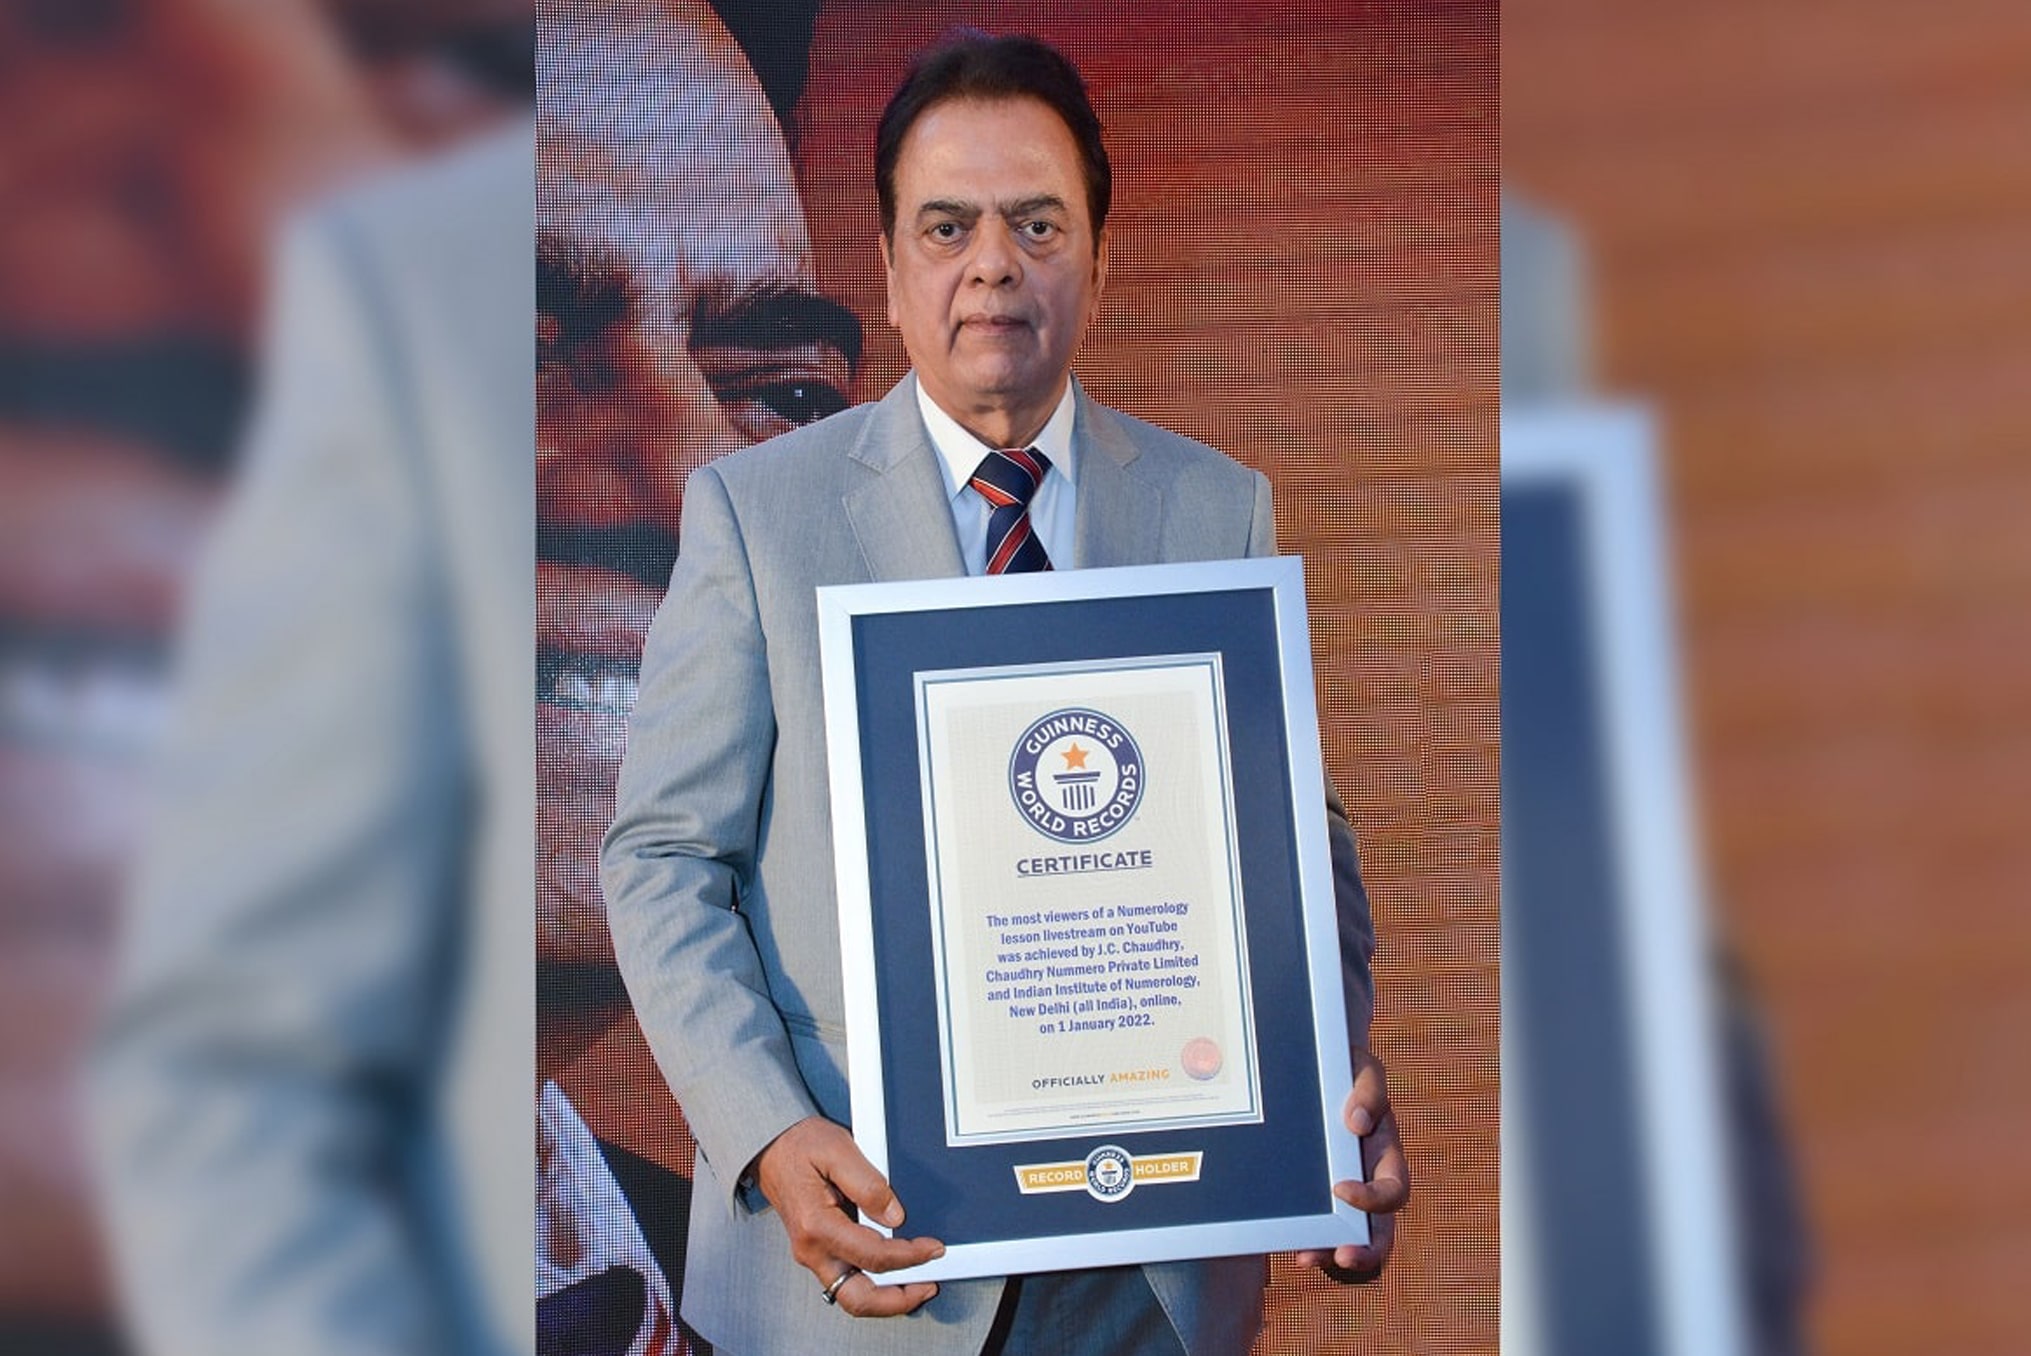 Guinness World Record in Numerolgoy by J C Chaudhry